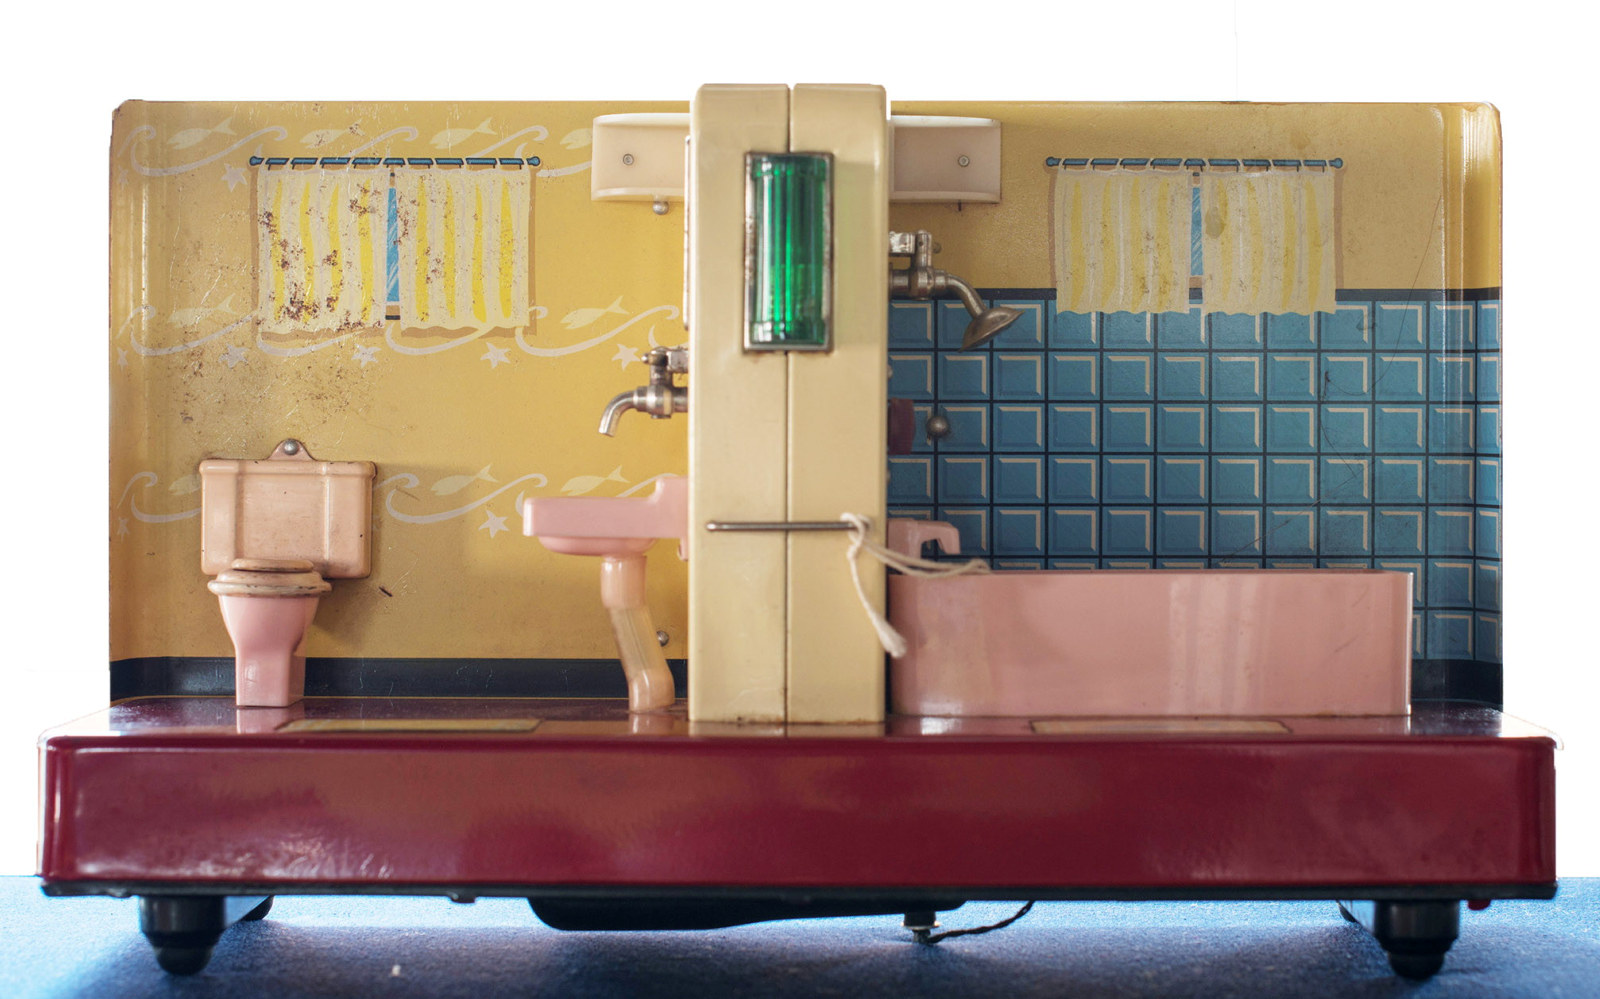 Model/sample of partitioned bathroom fitted with toilet, vanity, light and bath/shower, c.1950